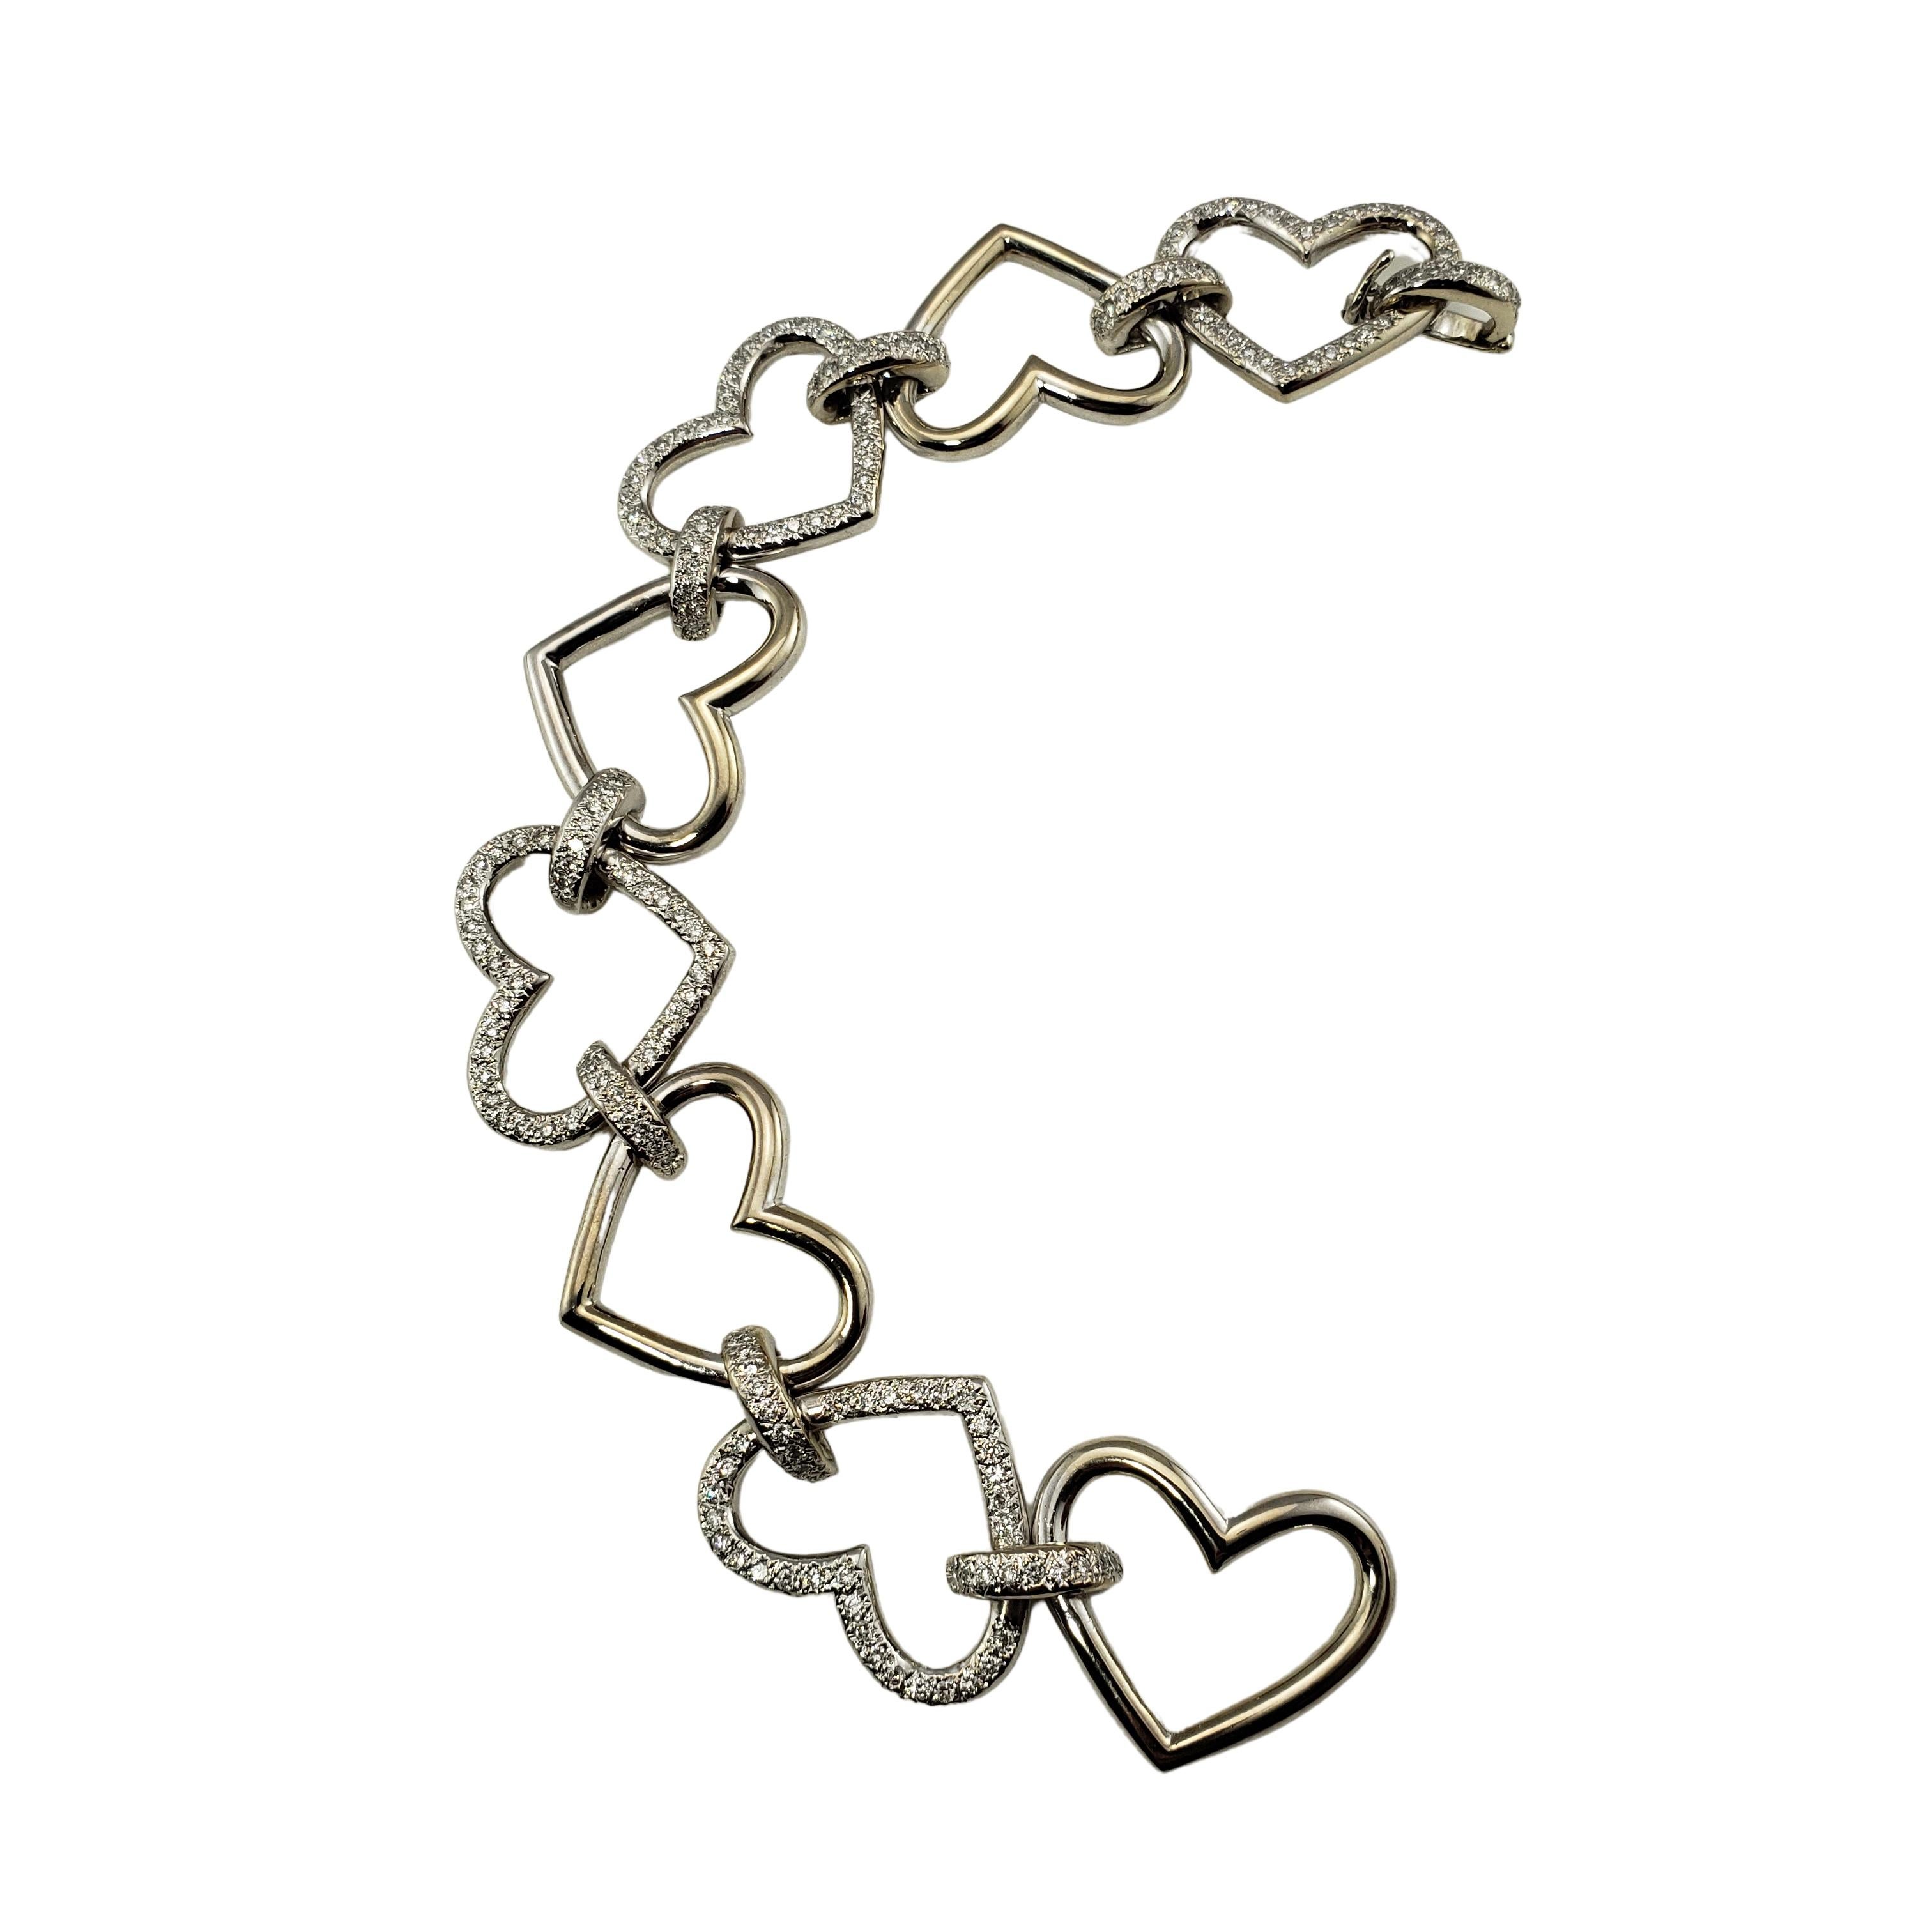 Vintage 18 Karat White Gold and Diamond Heart Link Bracelet-

This sparkling heart link bracelet features 192 round brilliant cut diamonds set in classic 18K white gold.  Width:  19 mm.

Approximate total diamond weight:  2 ct.

Diamond color: 